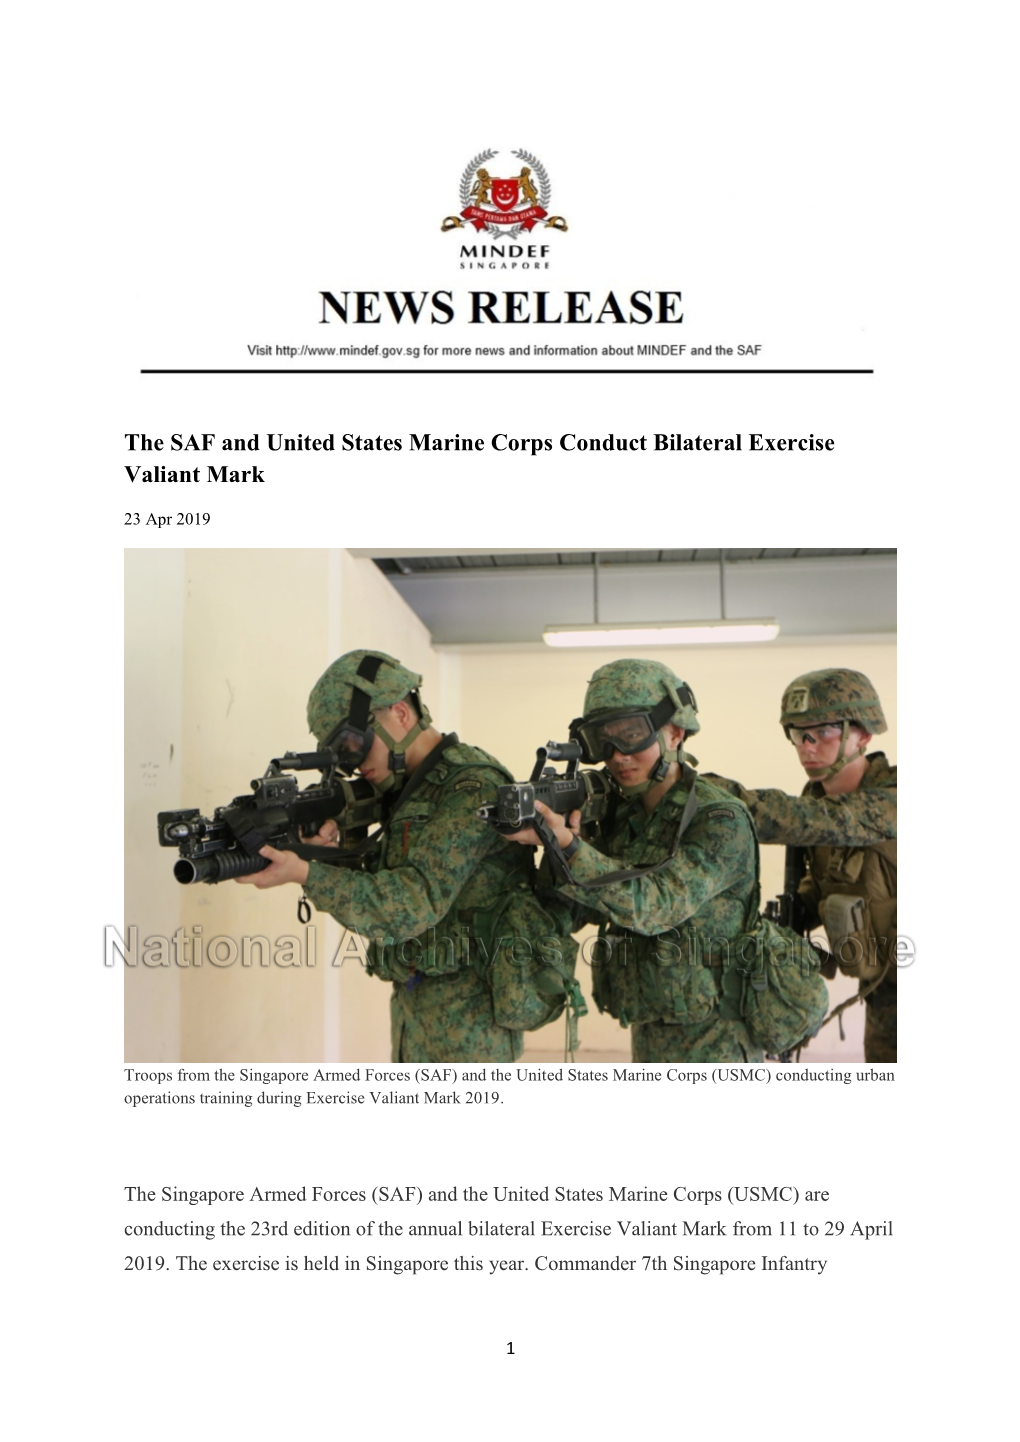 The SAF and United States Marine Corps Conduct Bilateral Exercise Valiant Mark